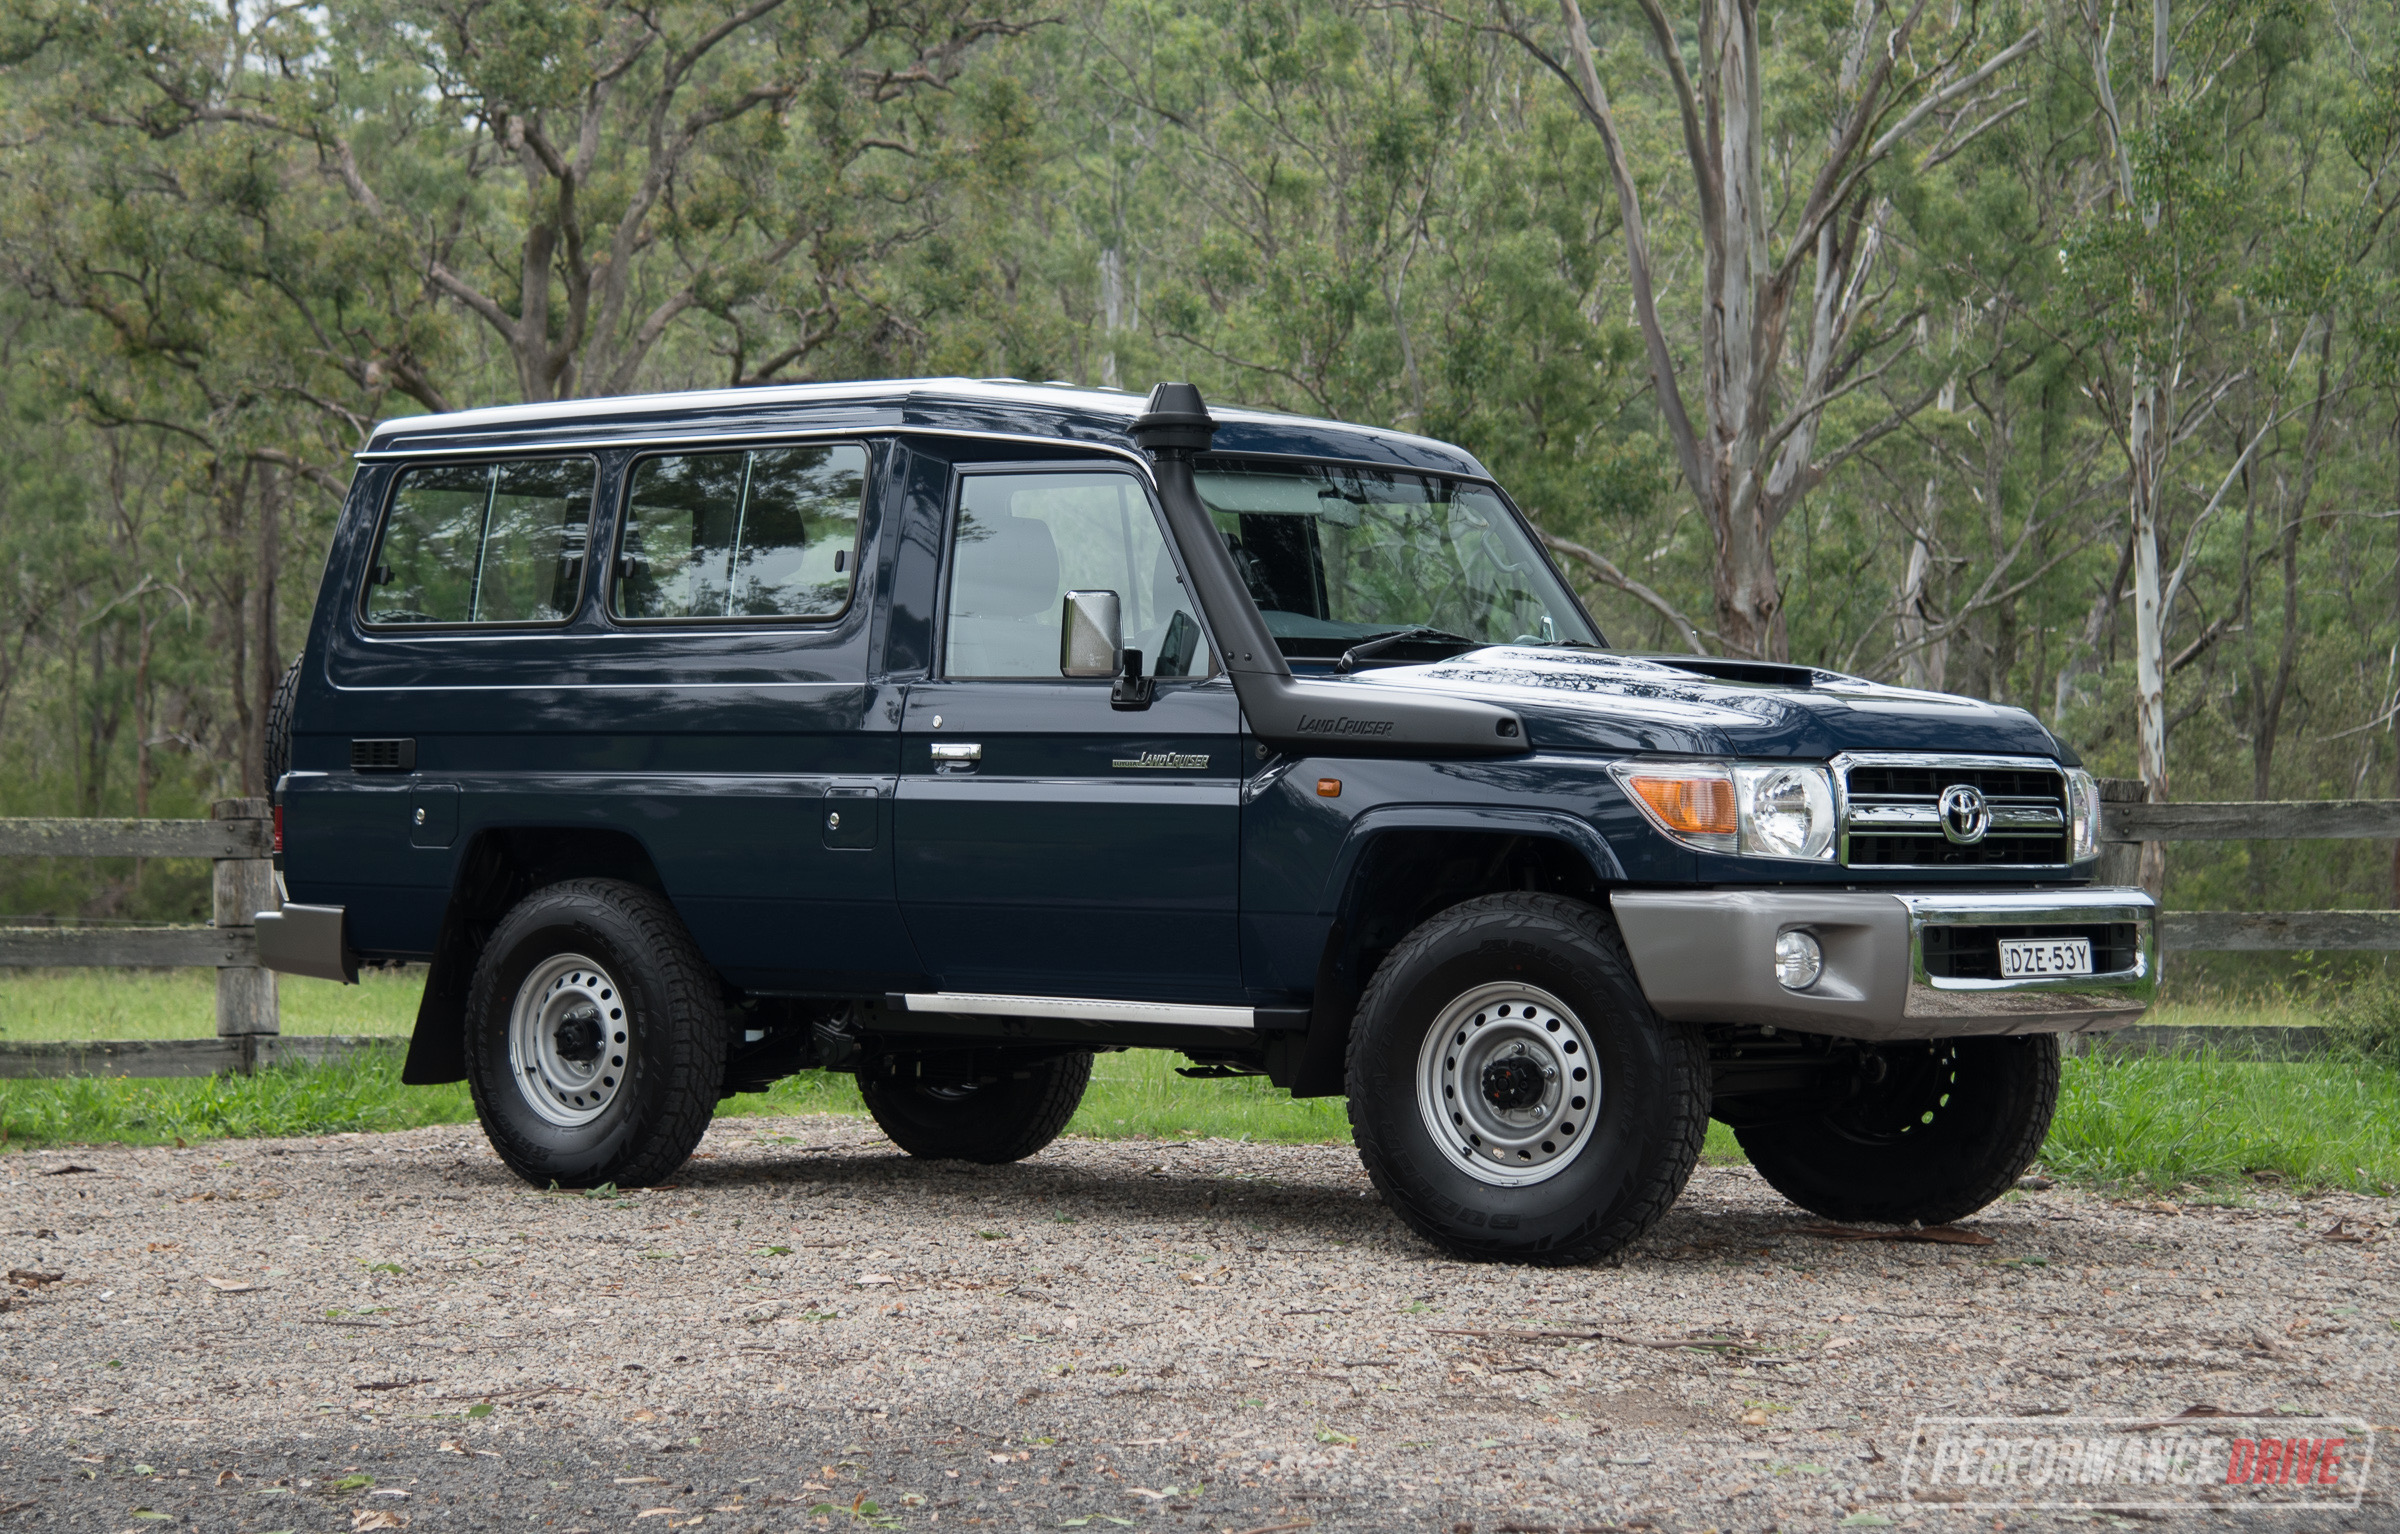 Video: 2018-2019 Toyota LandCruiser 78 Series – Detailed review